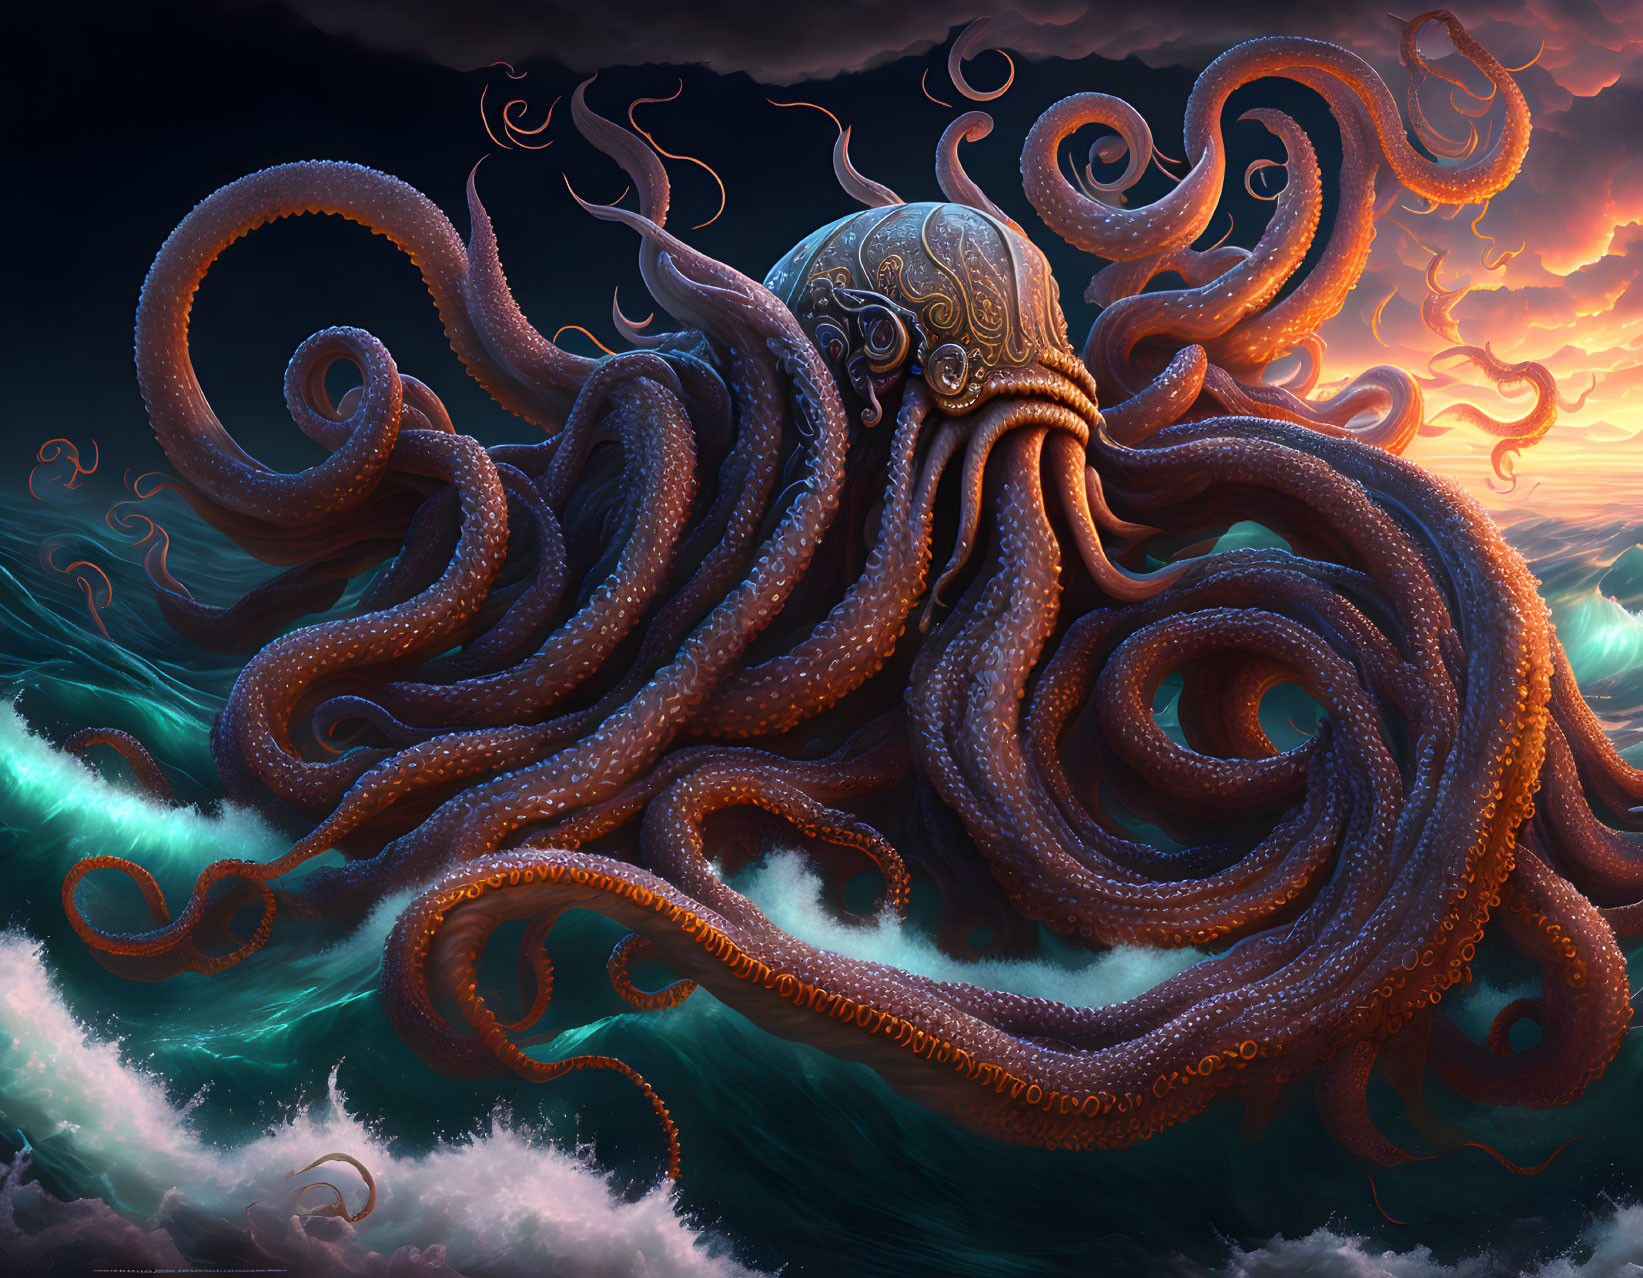 Giant Octopus Emerges from Turbulent Ocean Waves at Sunset